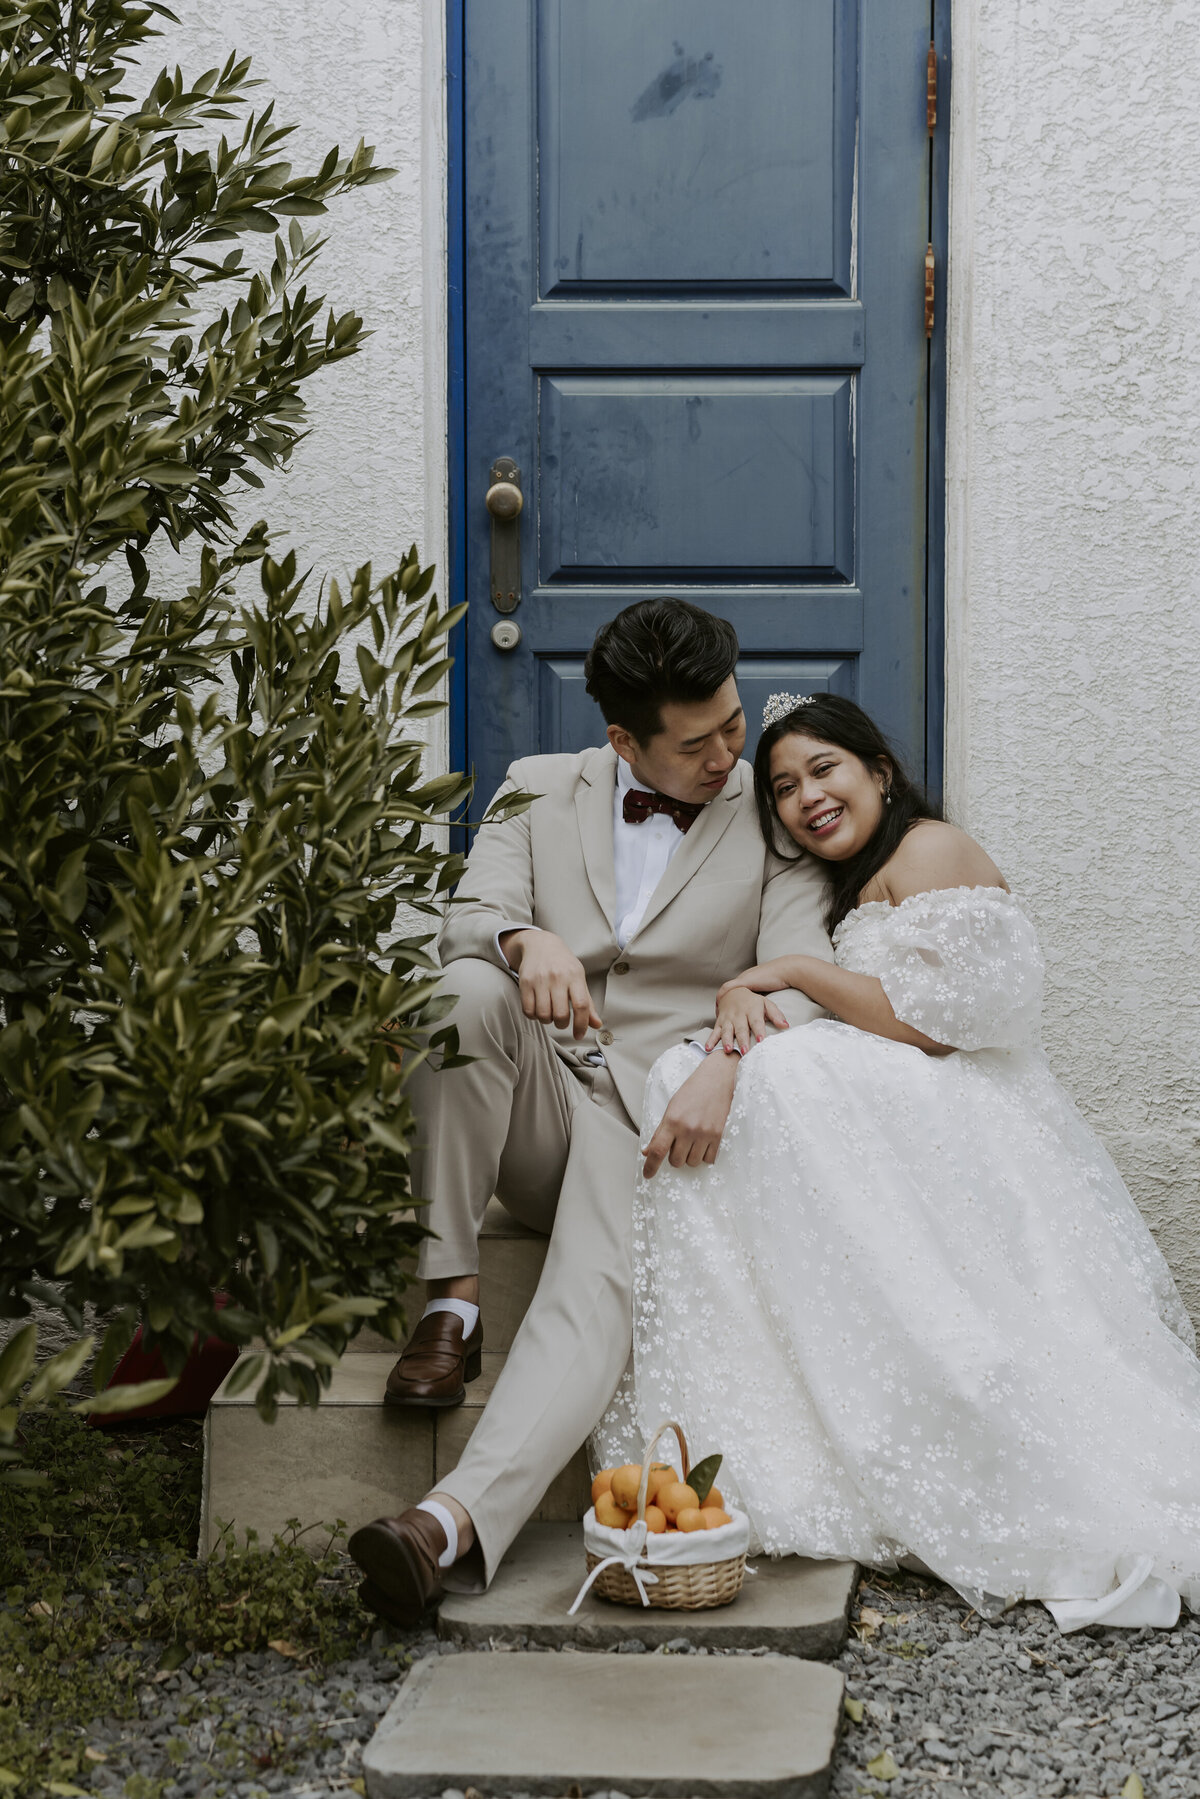 the couple sits down in front of a blue door the bride leaning her head to the groom's shoulder